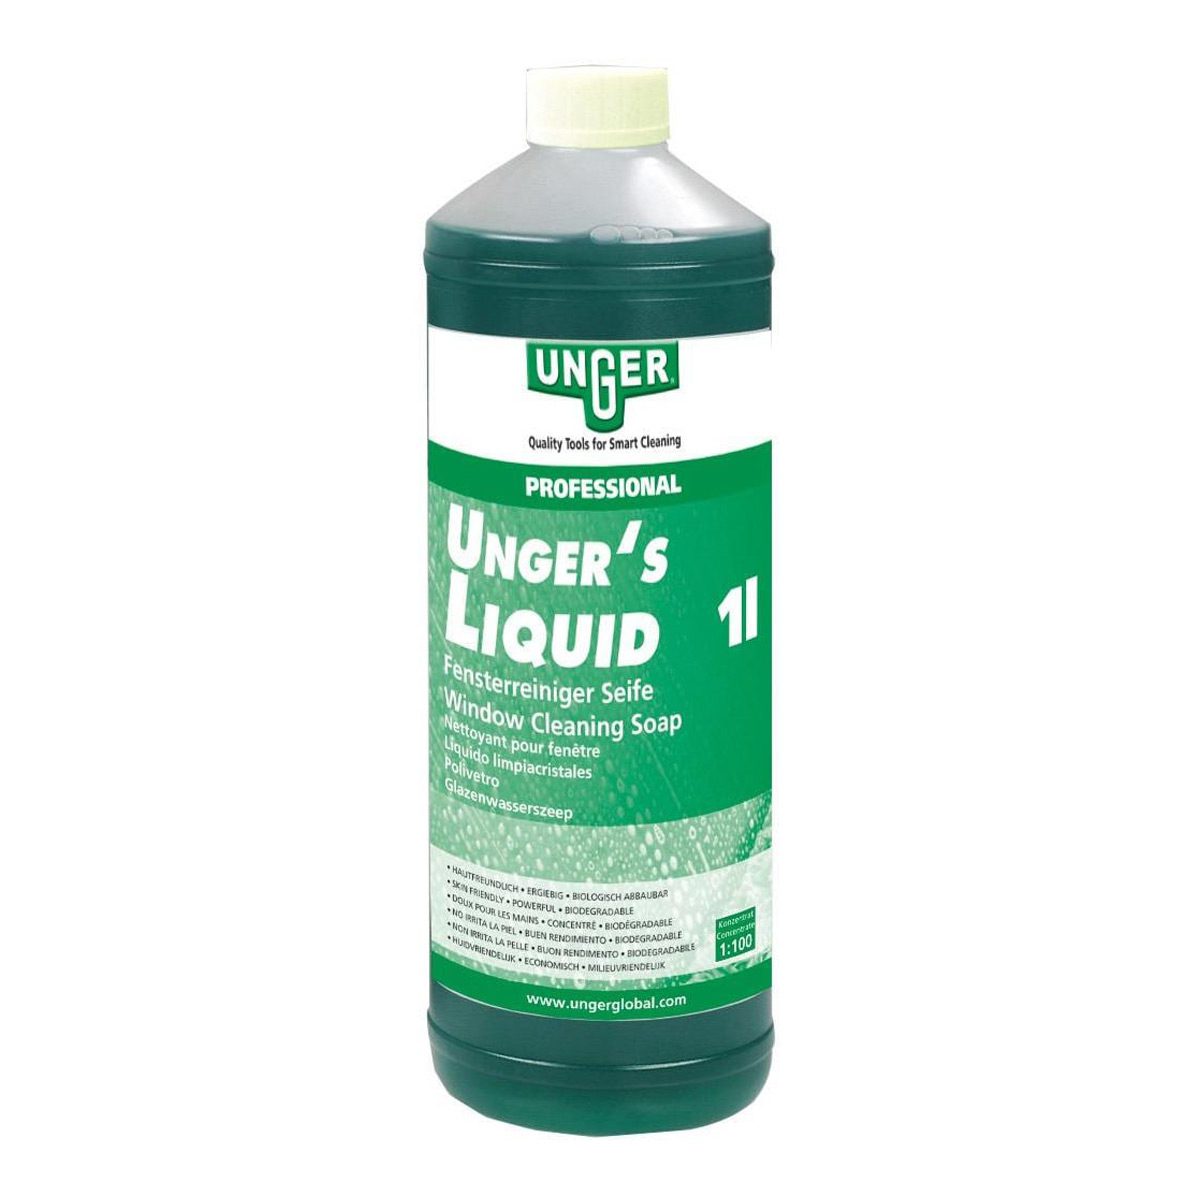 cleaning-equipment-squeegees-and-window-cleaning-unger-liquid-glass-cleaner-1L-litre-window-cleaning-soap-liquid-concentrate-mixing-ratio-economic-eco-friendly-vjs-distributors-U-FR100